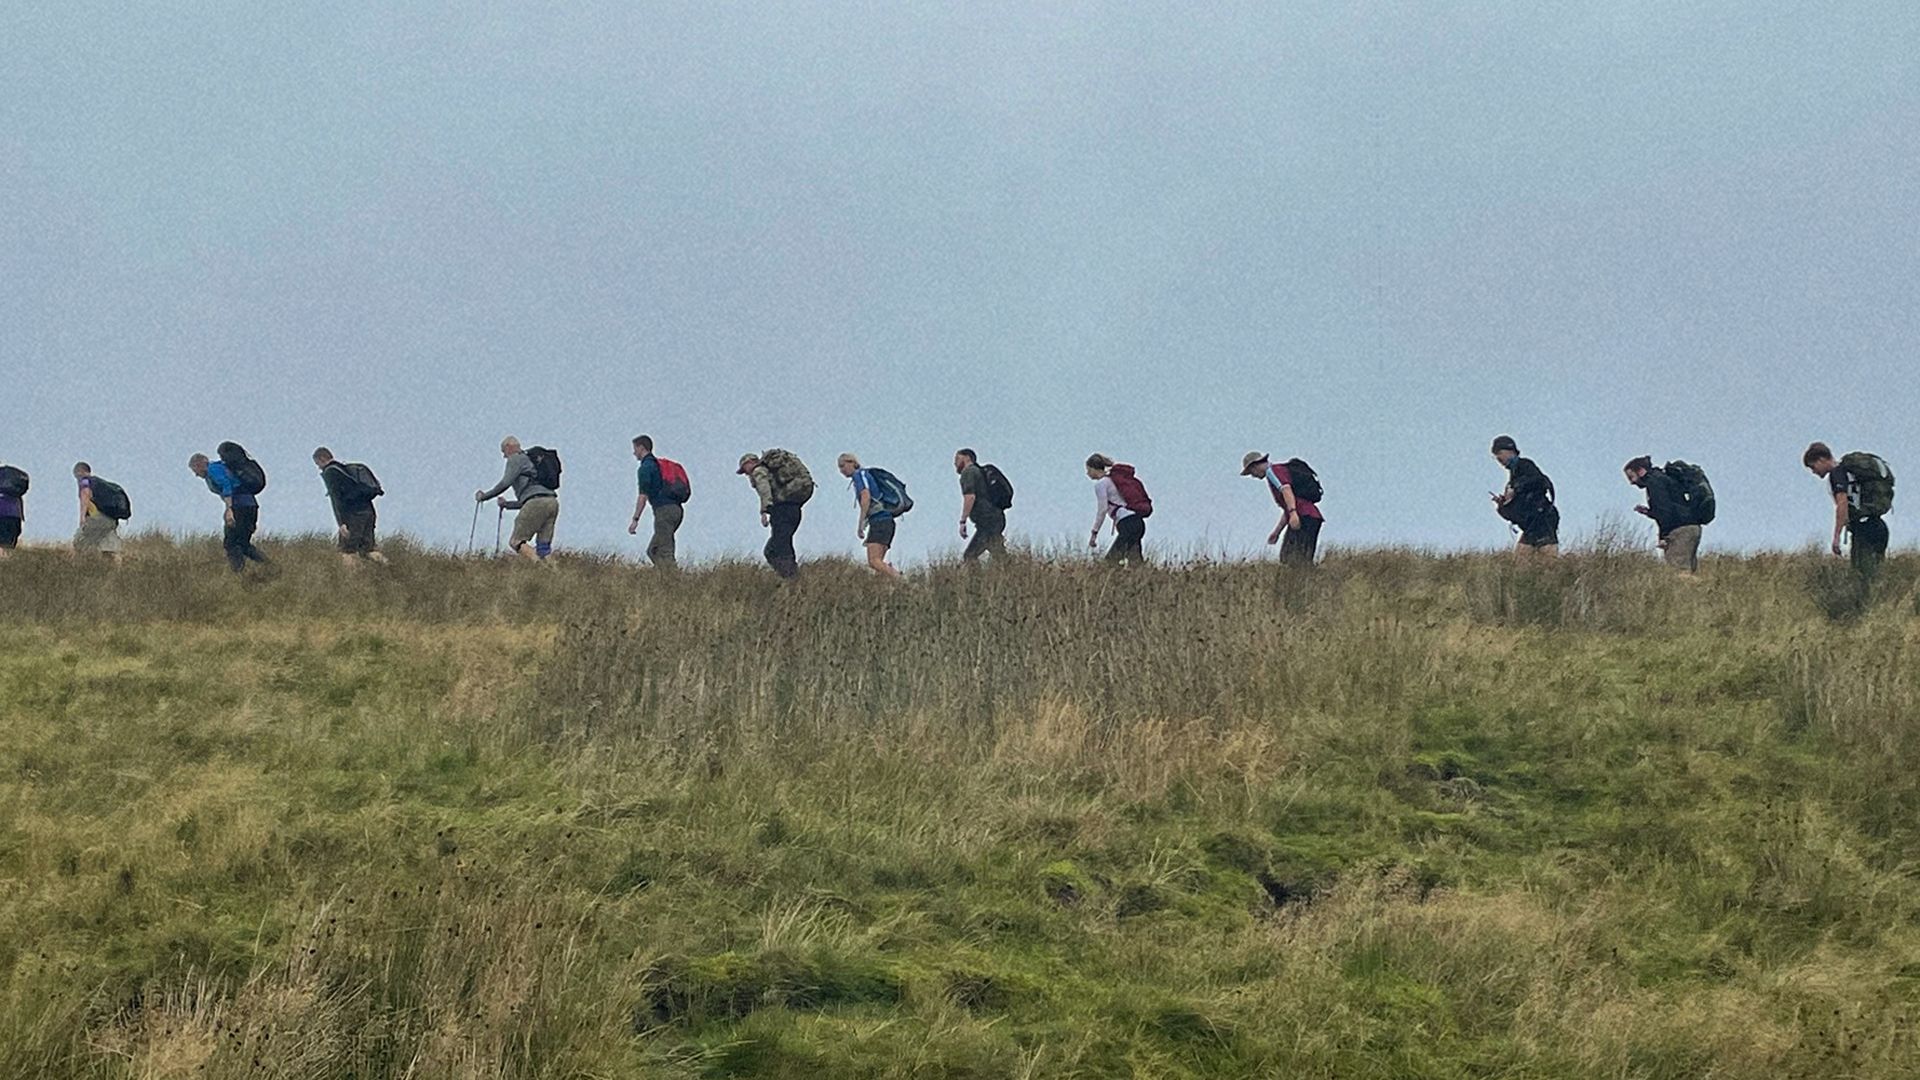 Steven and his group trekking one of the Yorkshire Three Peaks